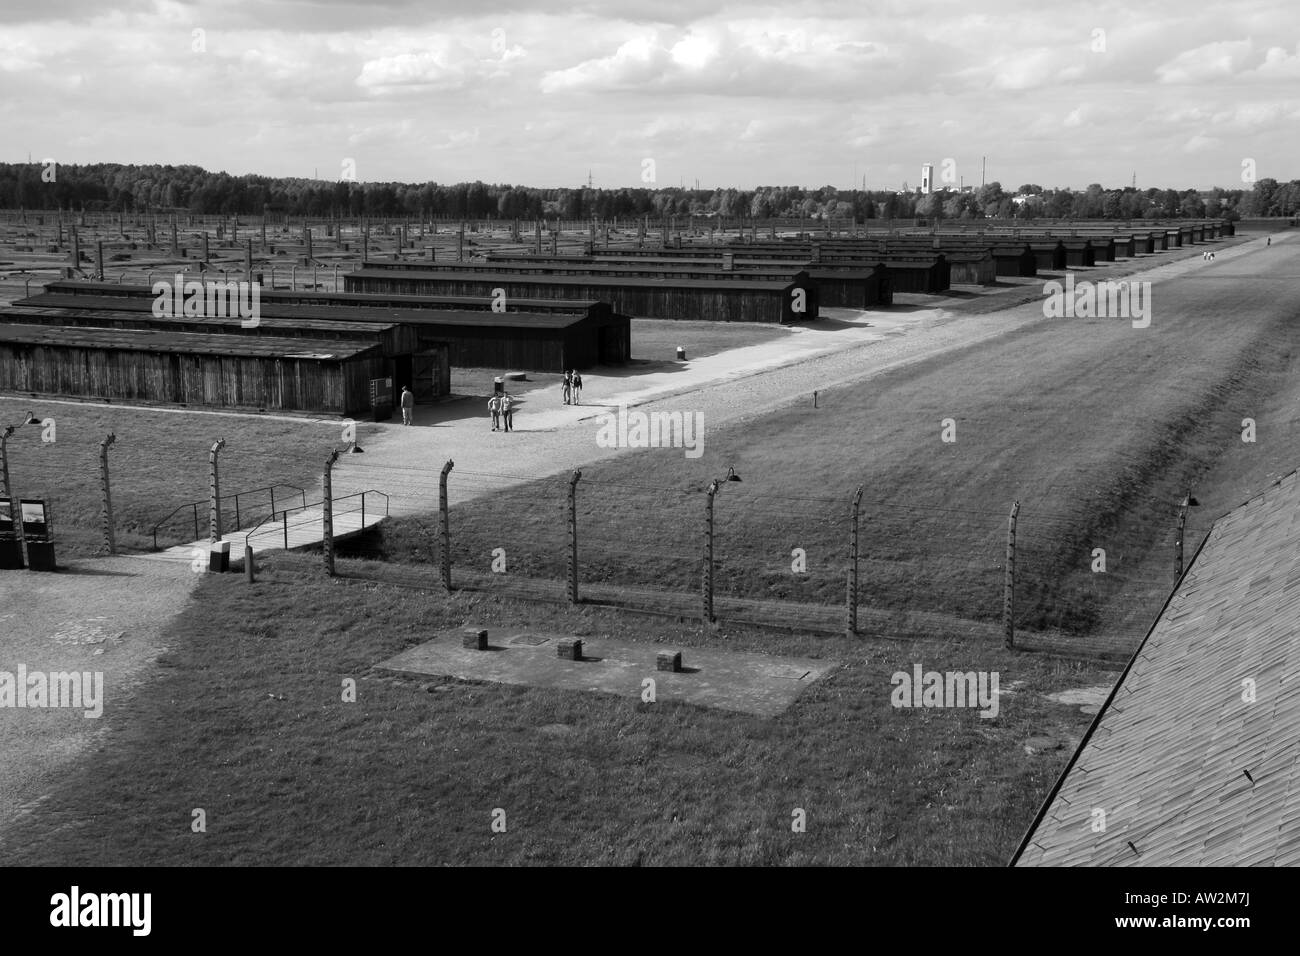 The remaining wooden huts in the former Nazi concentration camp at Auschwitz Birkenau, Oswiecim, Poland. Stock Photo